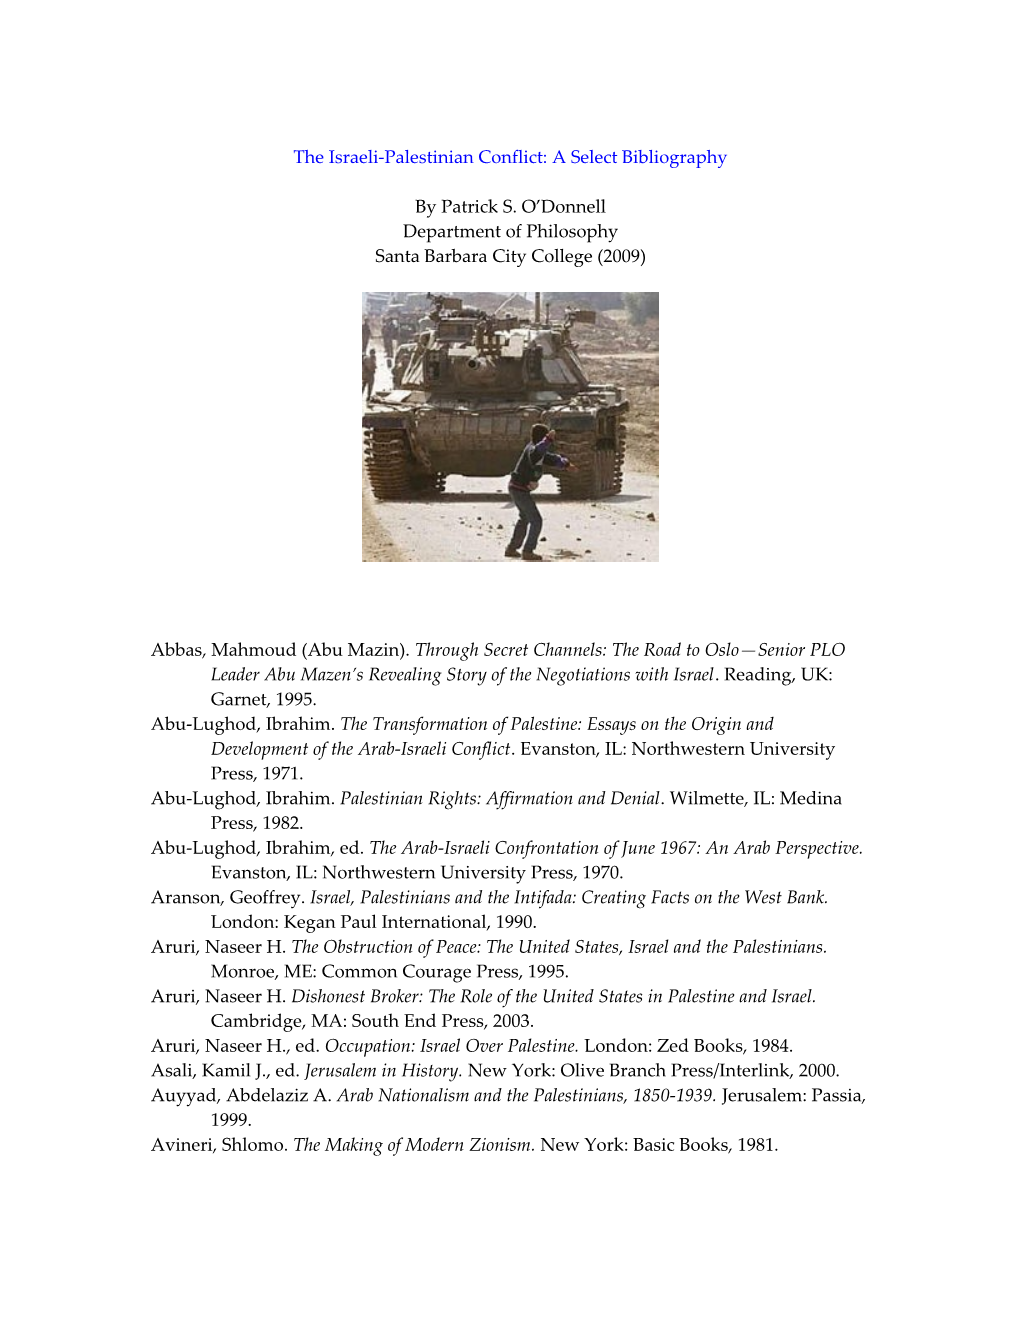 Some Sources Relevant to the Israeli-Palestinian Conflict